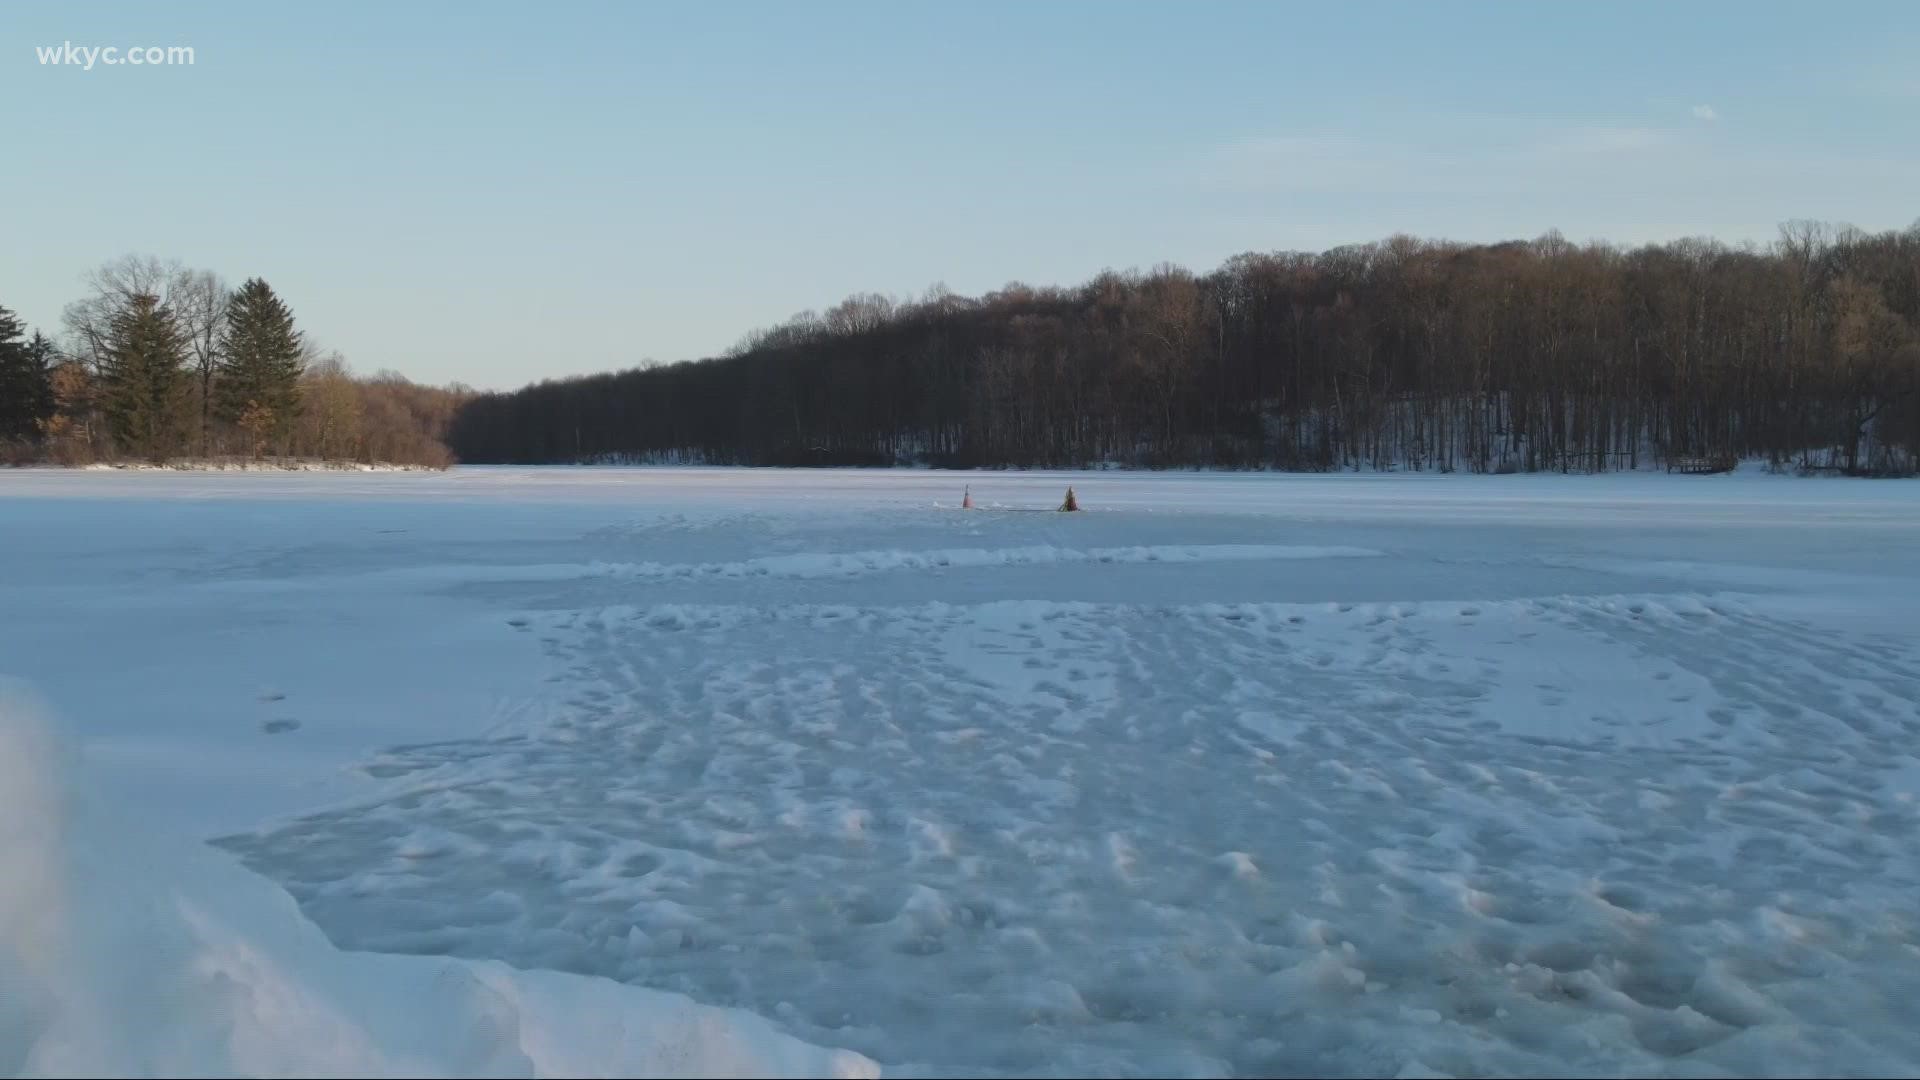 Mayor Craig Shubert resigned last week after making comments on ice fishing and prostitution.